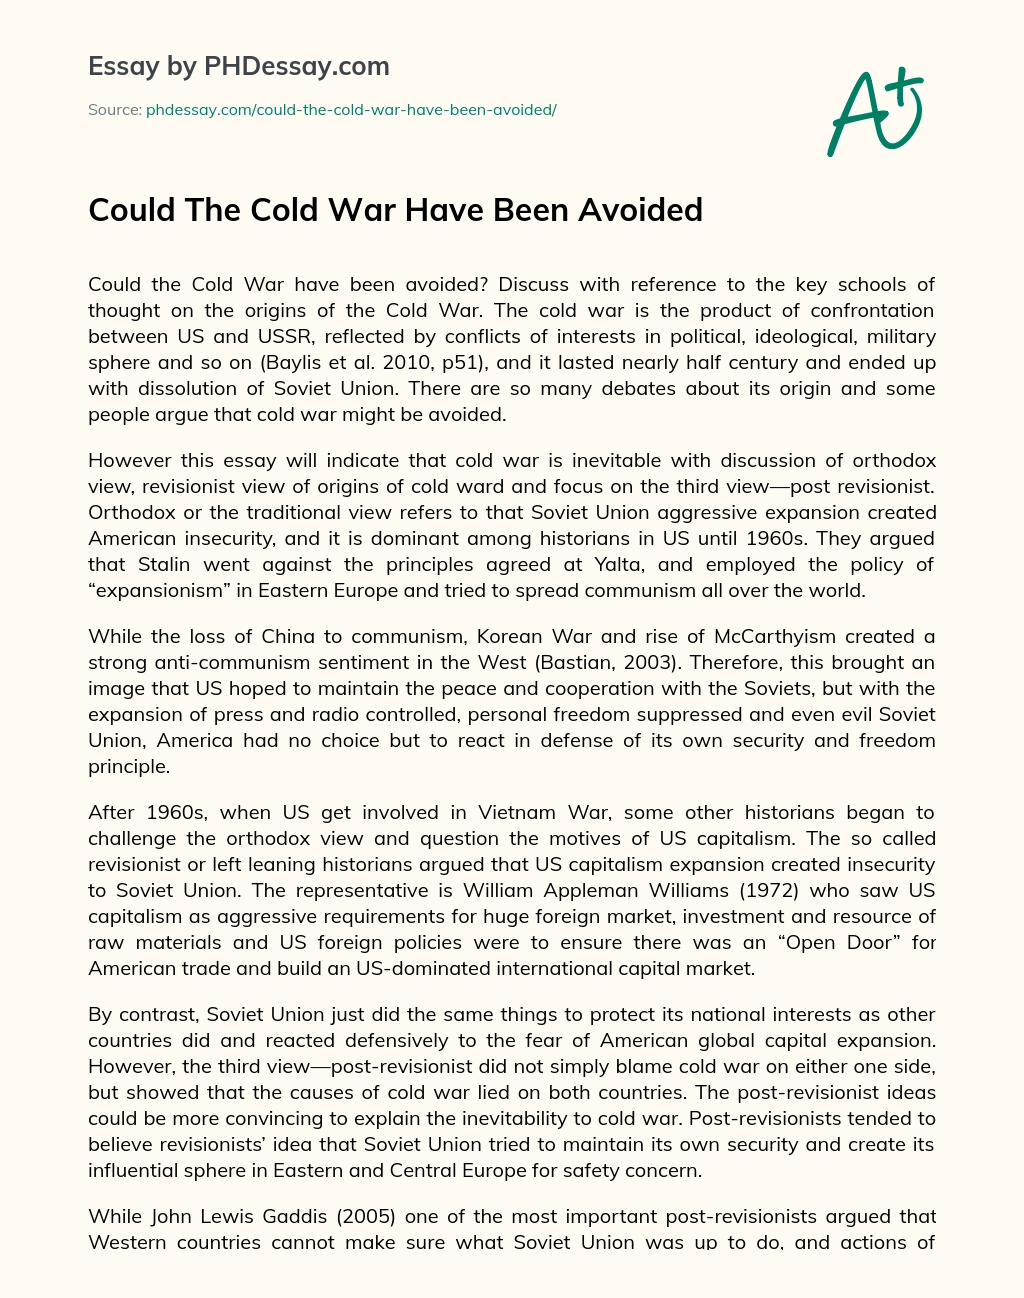 Could The Cold War Have Been Avoided essay